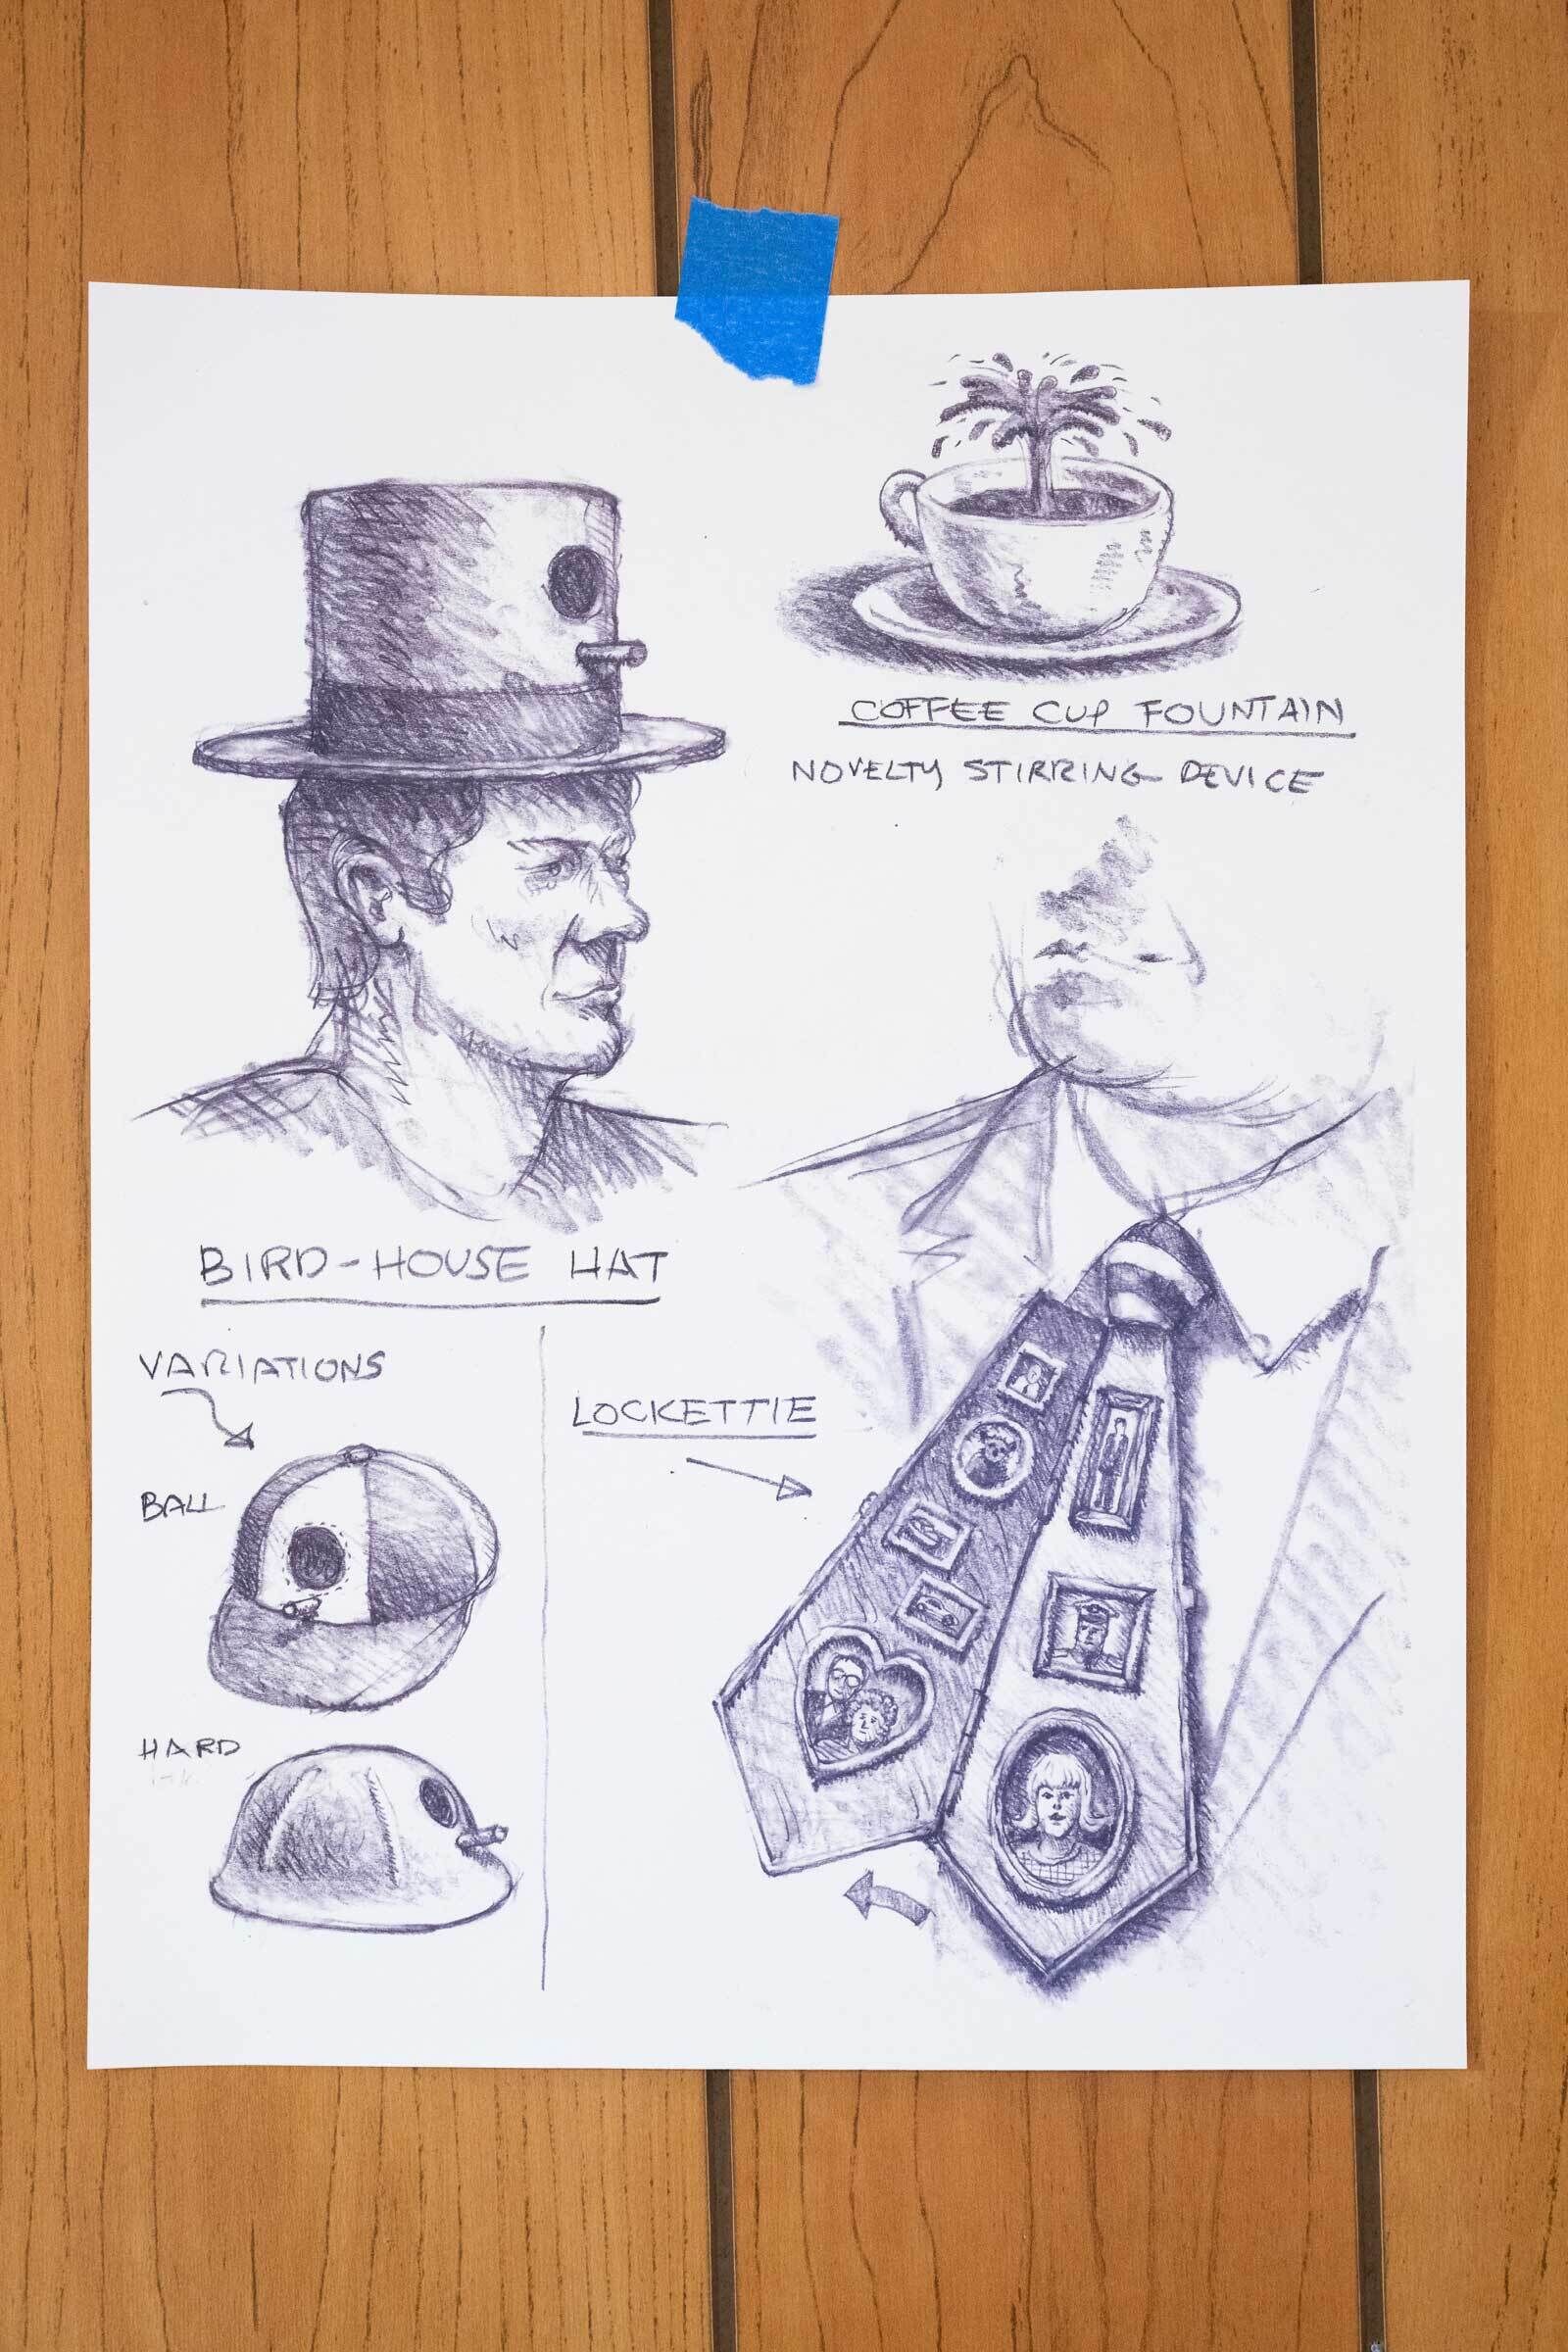 Sketches of whimsical inventions like a top hat with a door, a coffee cup fountain, and a tie with lockets taped to a wooden surface.